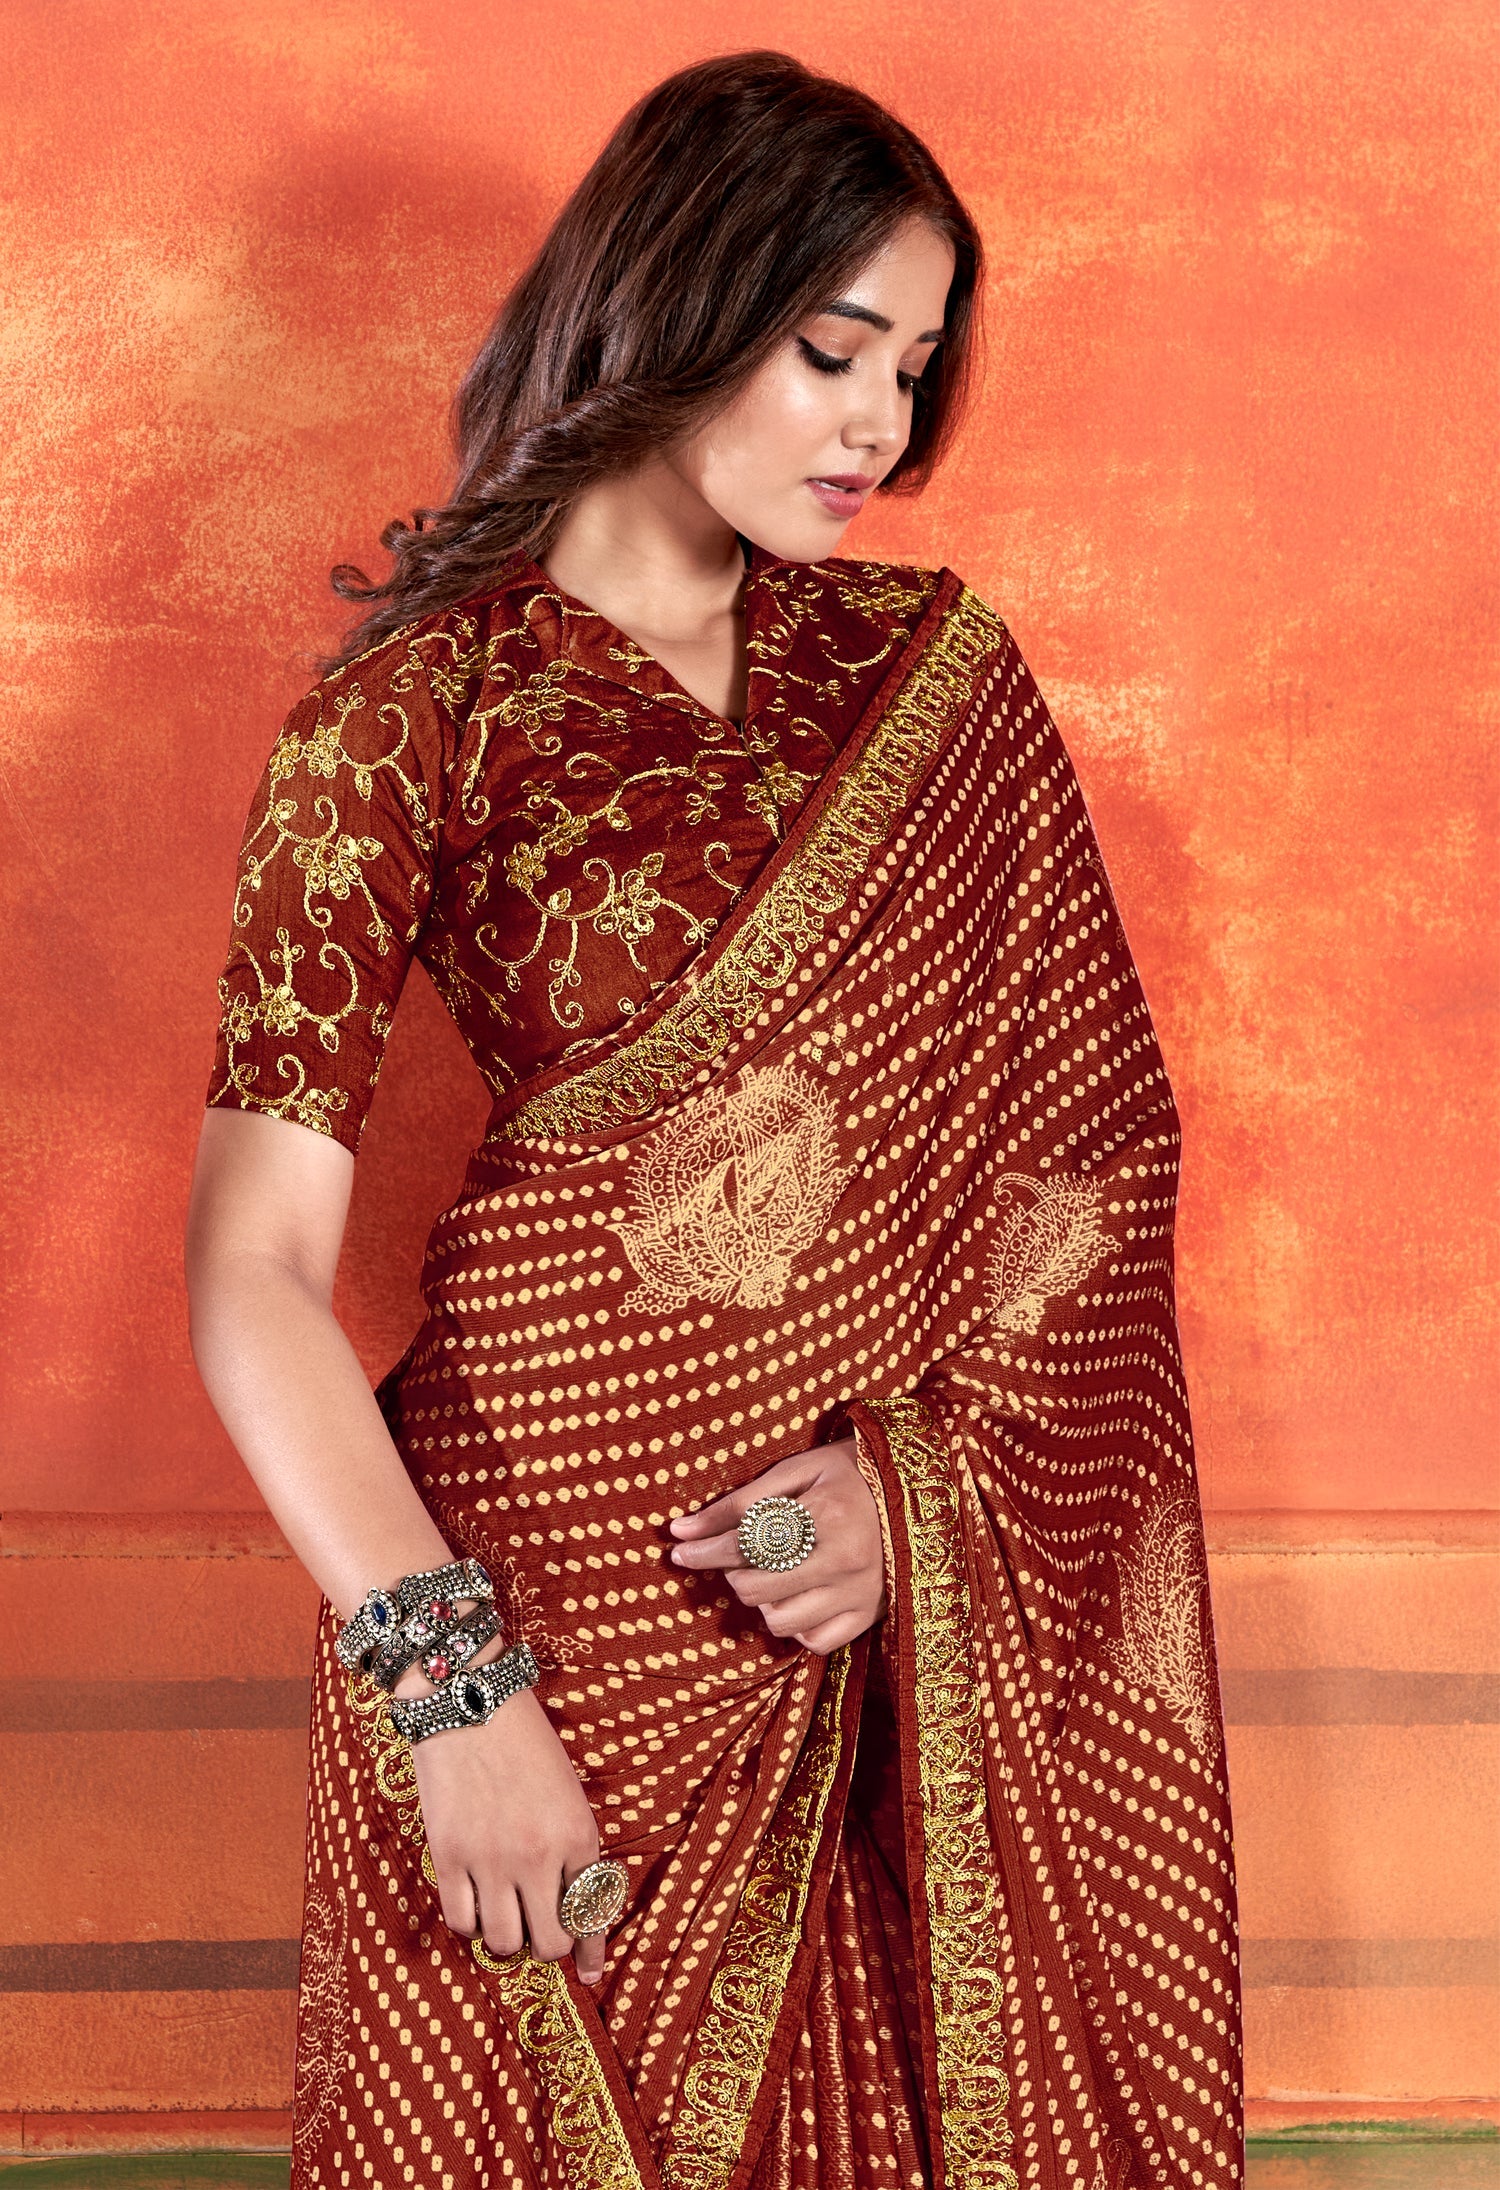 Buy MySilkLove Sepia Skin Brown Chiffon Saree With Embroidery Work Online